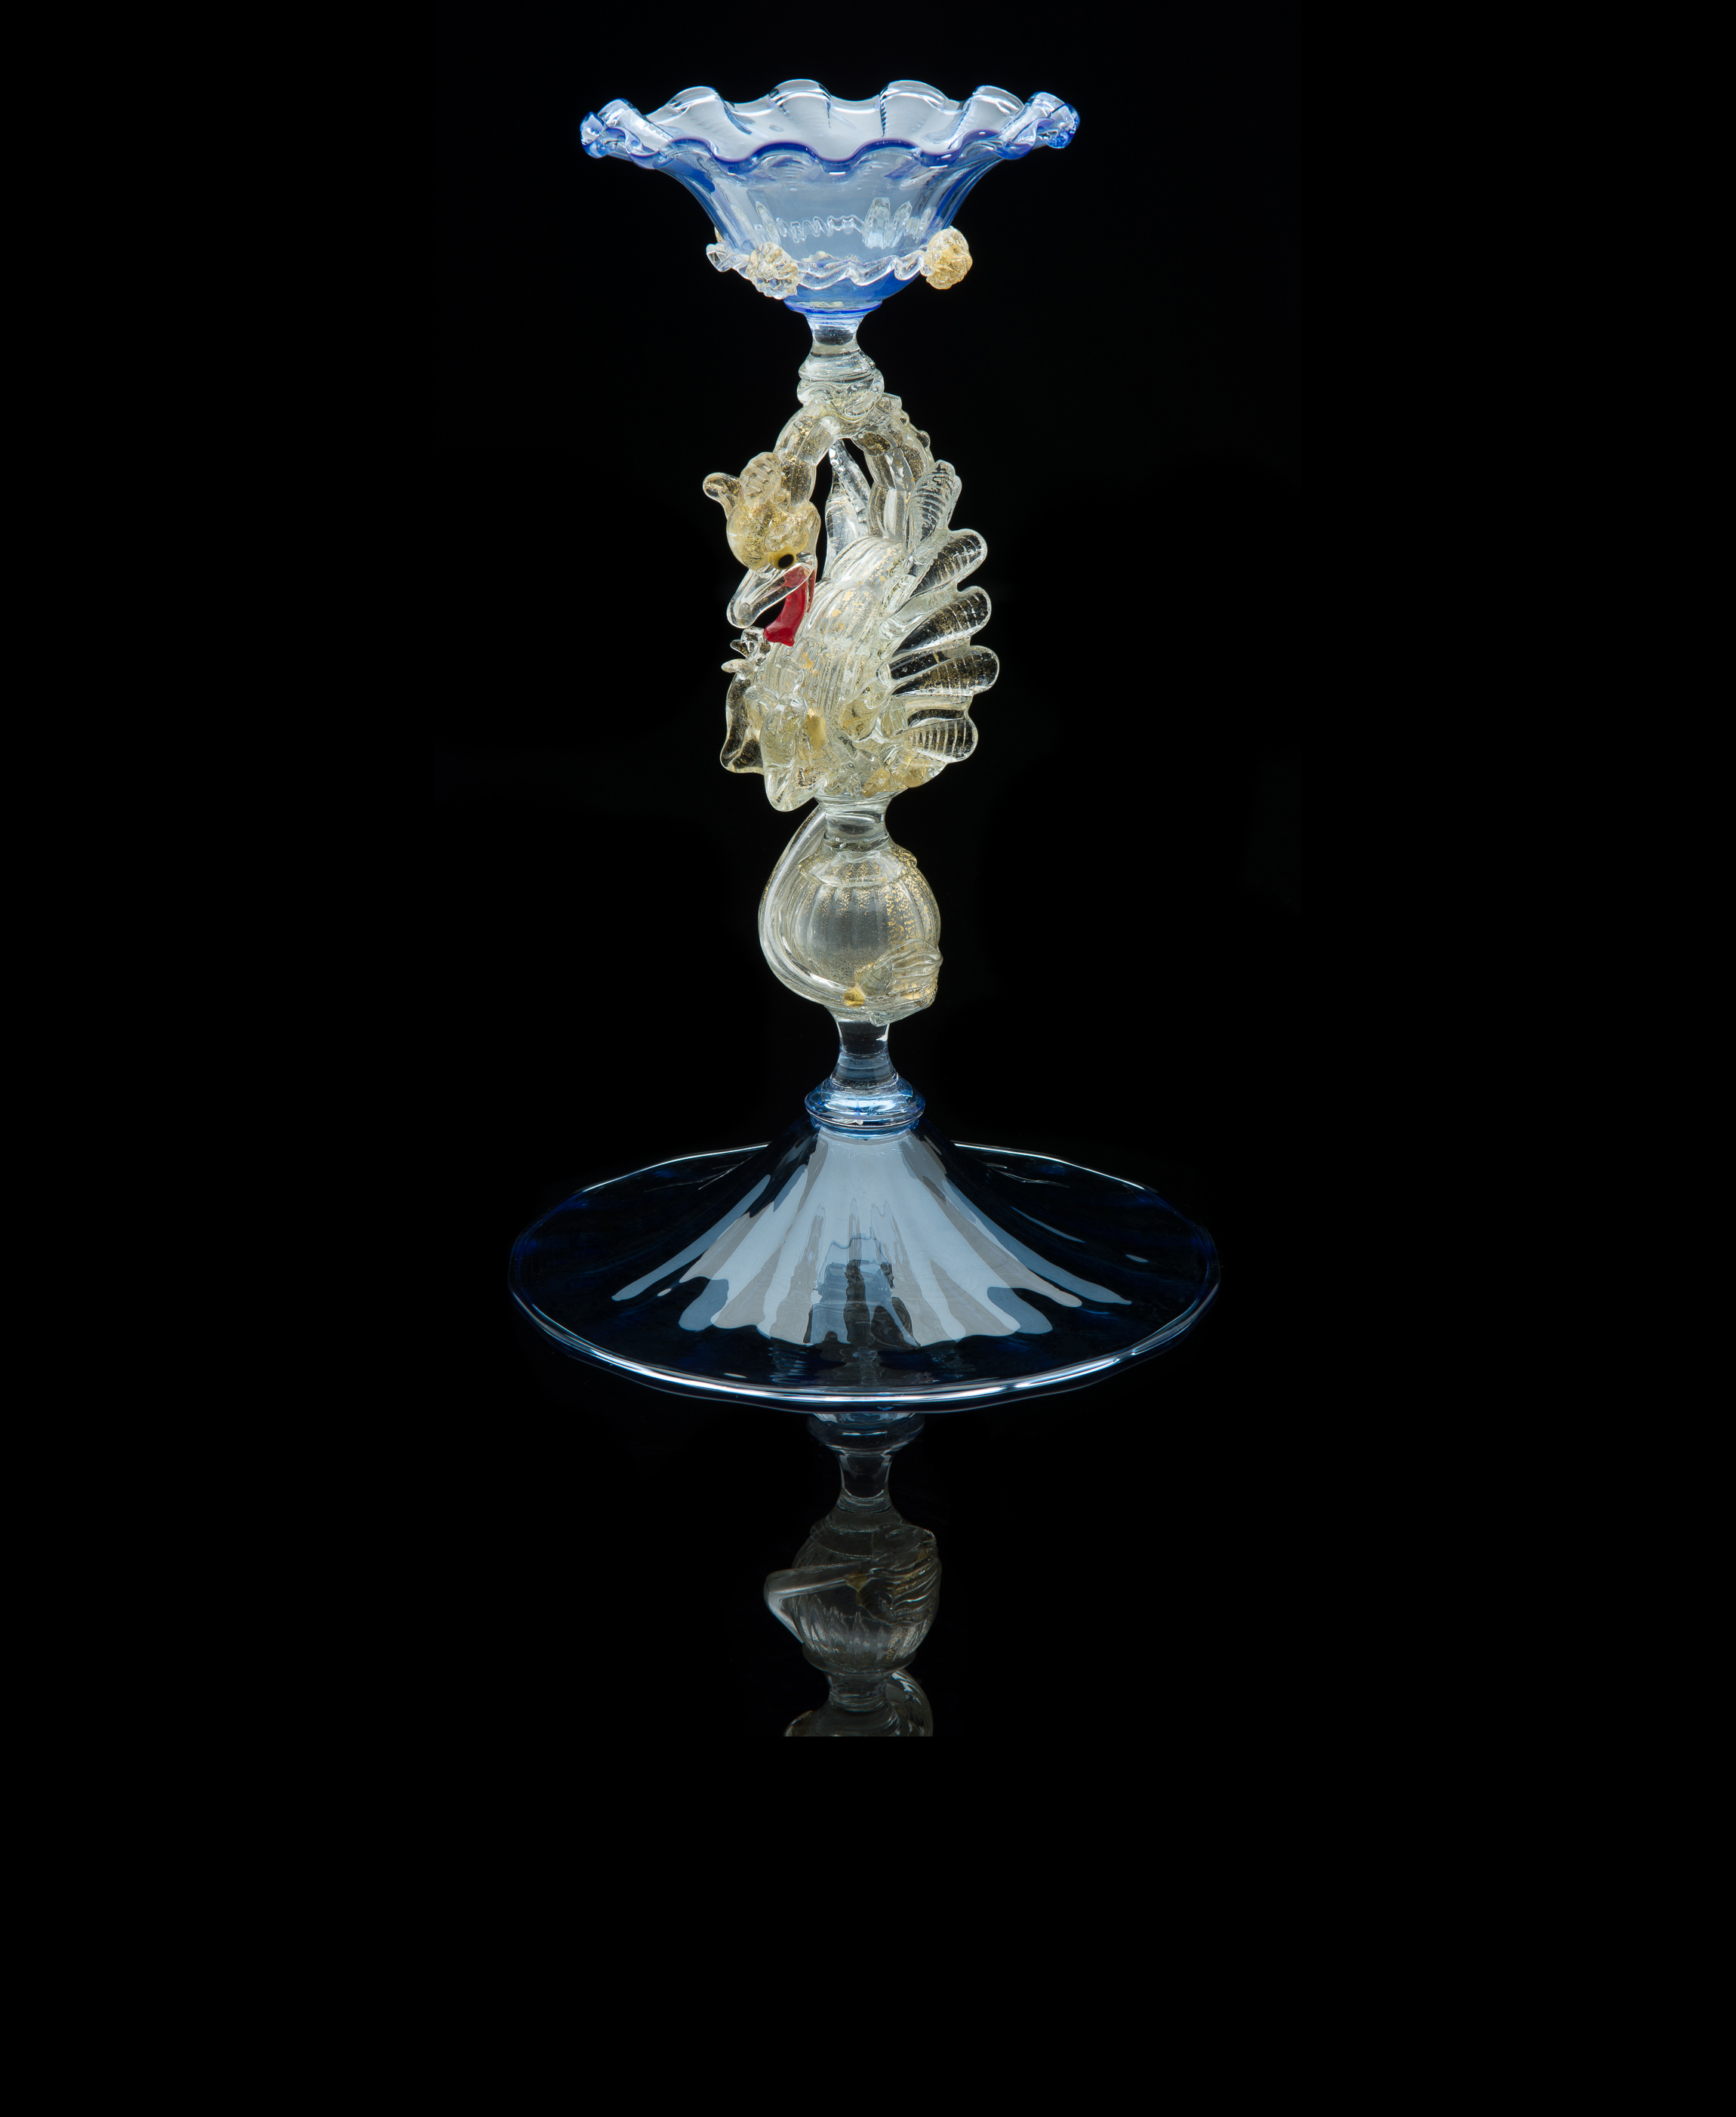  Salviati and Company,&nbsp; Compote with Dragon Stem and Votive Candle Holder&nbsp; (circa 1890, glass), VV.229 